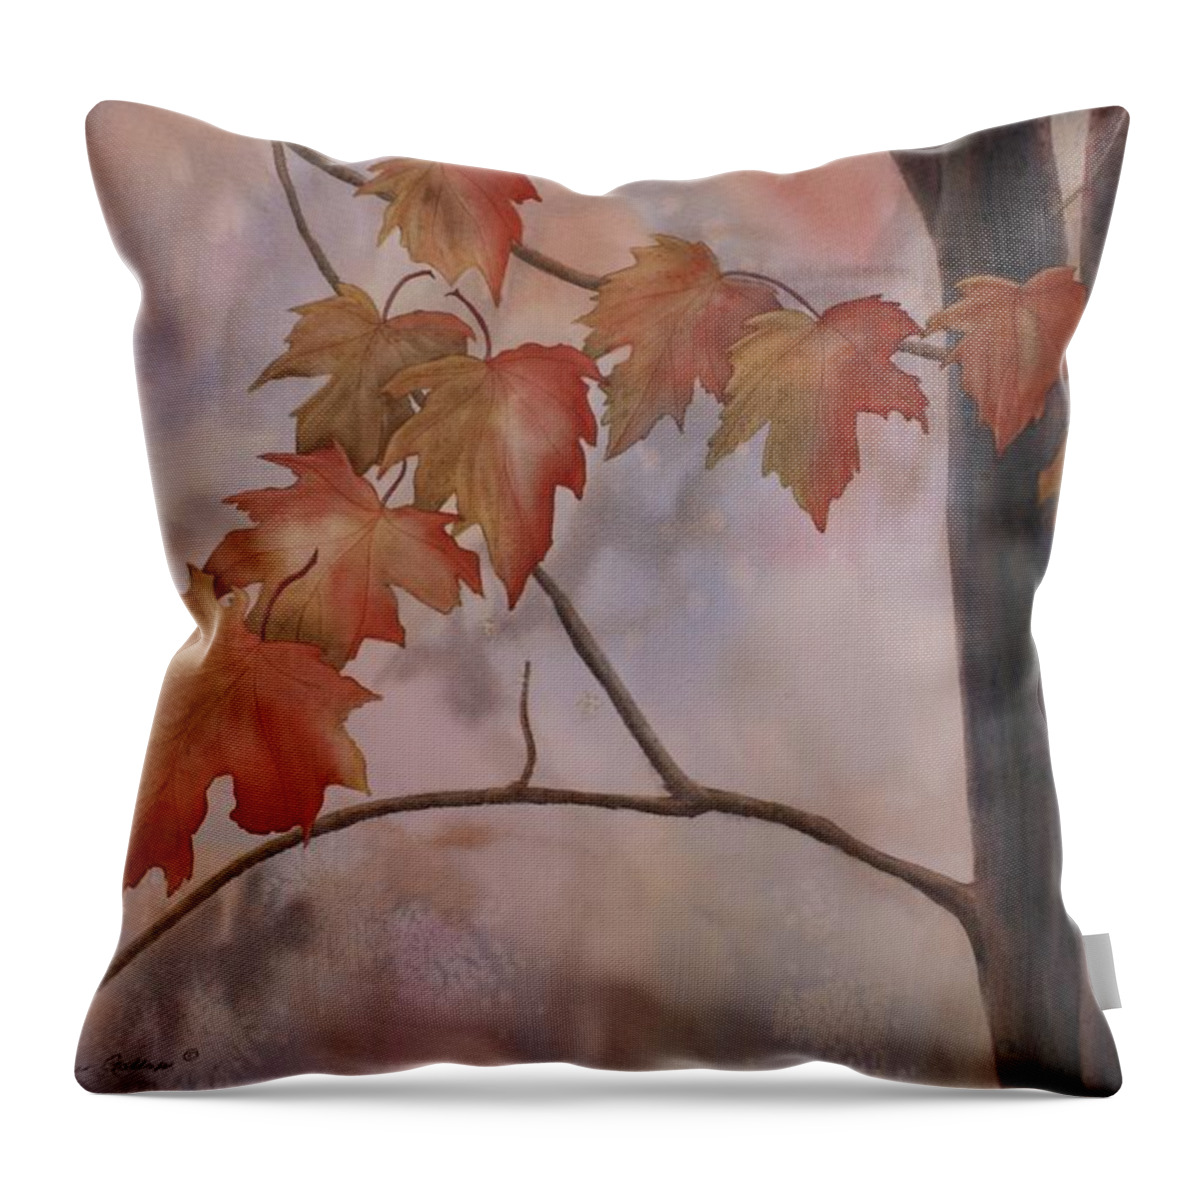 Maple Leaves Throw Pillow featuring the painting Good Morning Maple by Heather Gallup